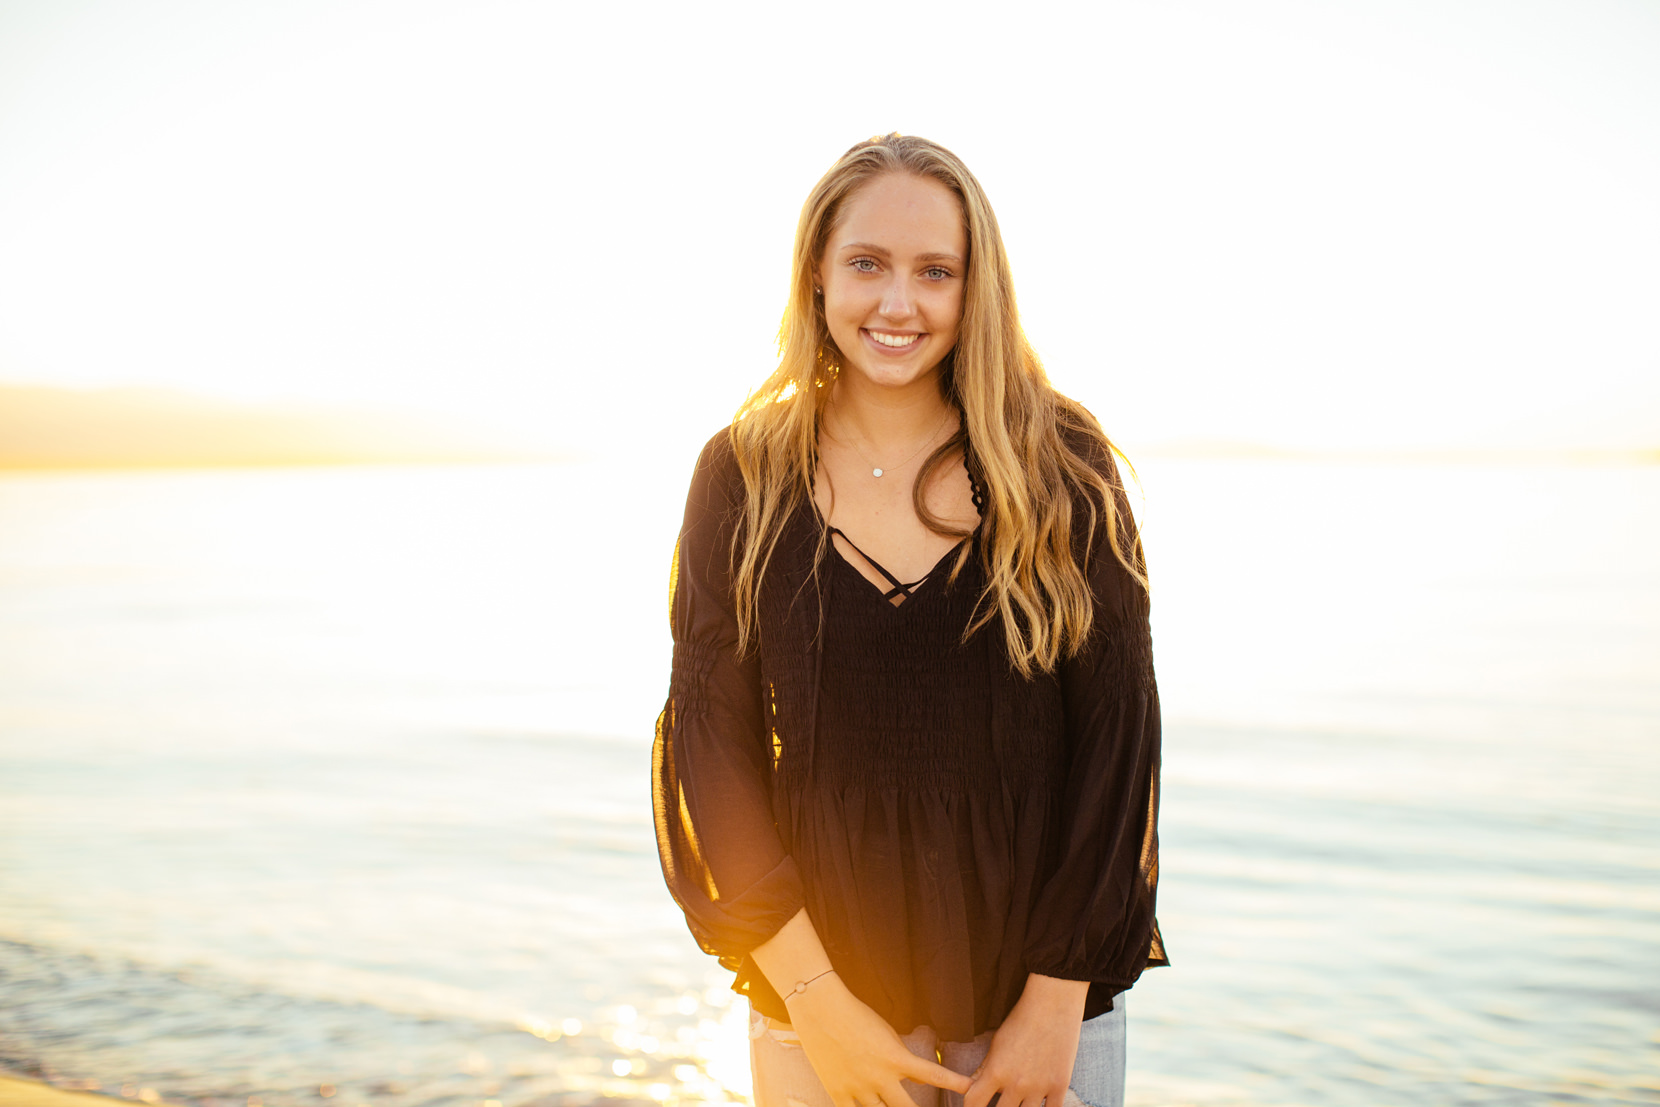 South Whidbey Senior Portraits